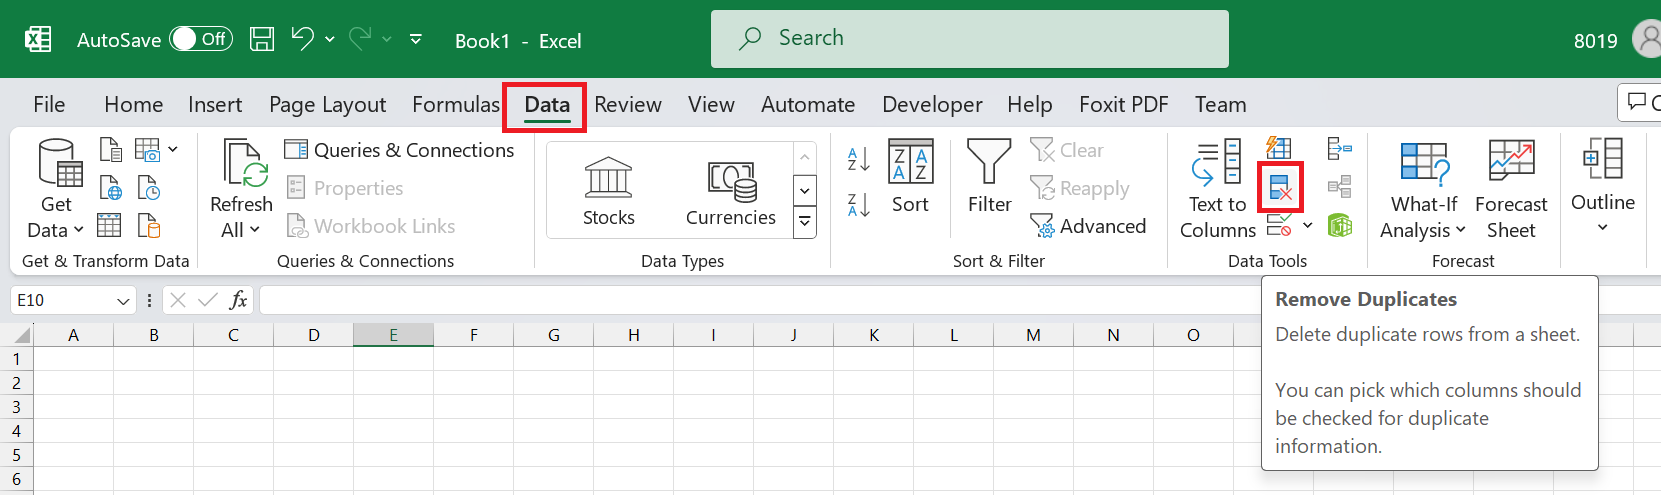 remove duplicate button in Excel